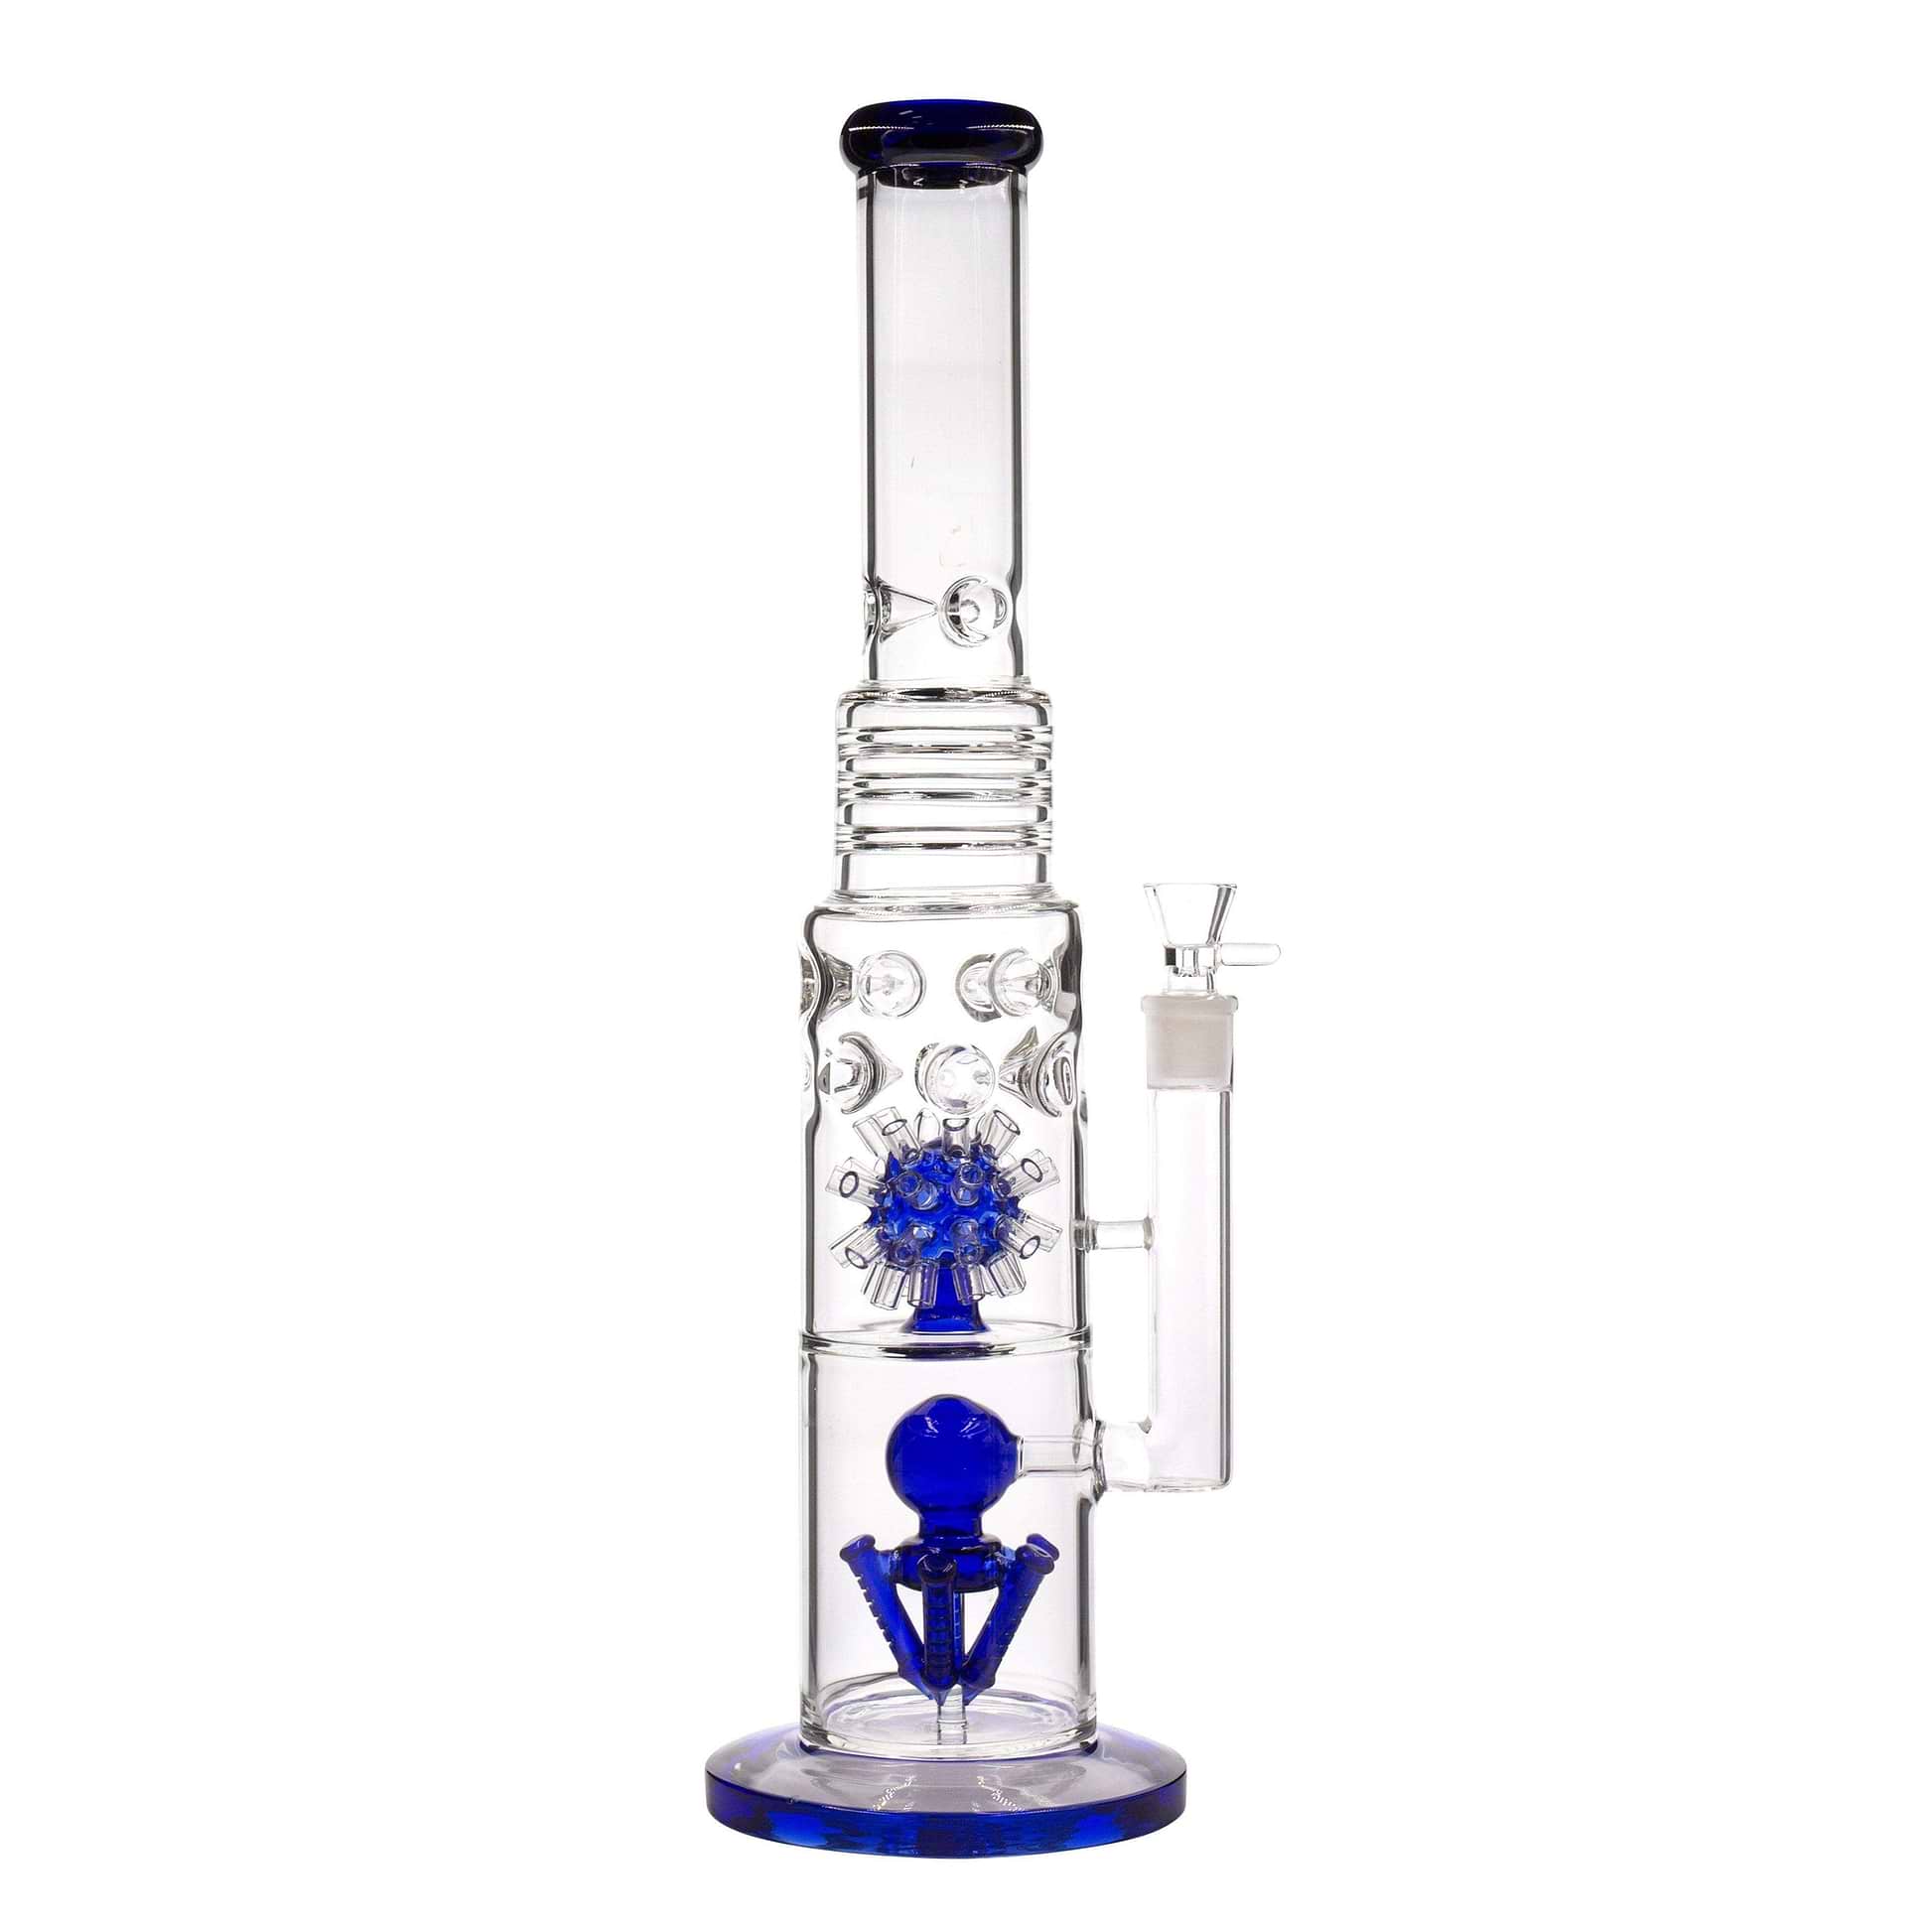 Blue Huge 19-inch glass bong smoking device with 2 percs unique diffision morning star perc unique design sturdy base